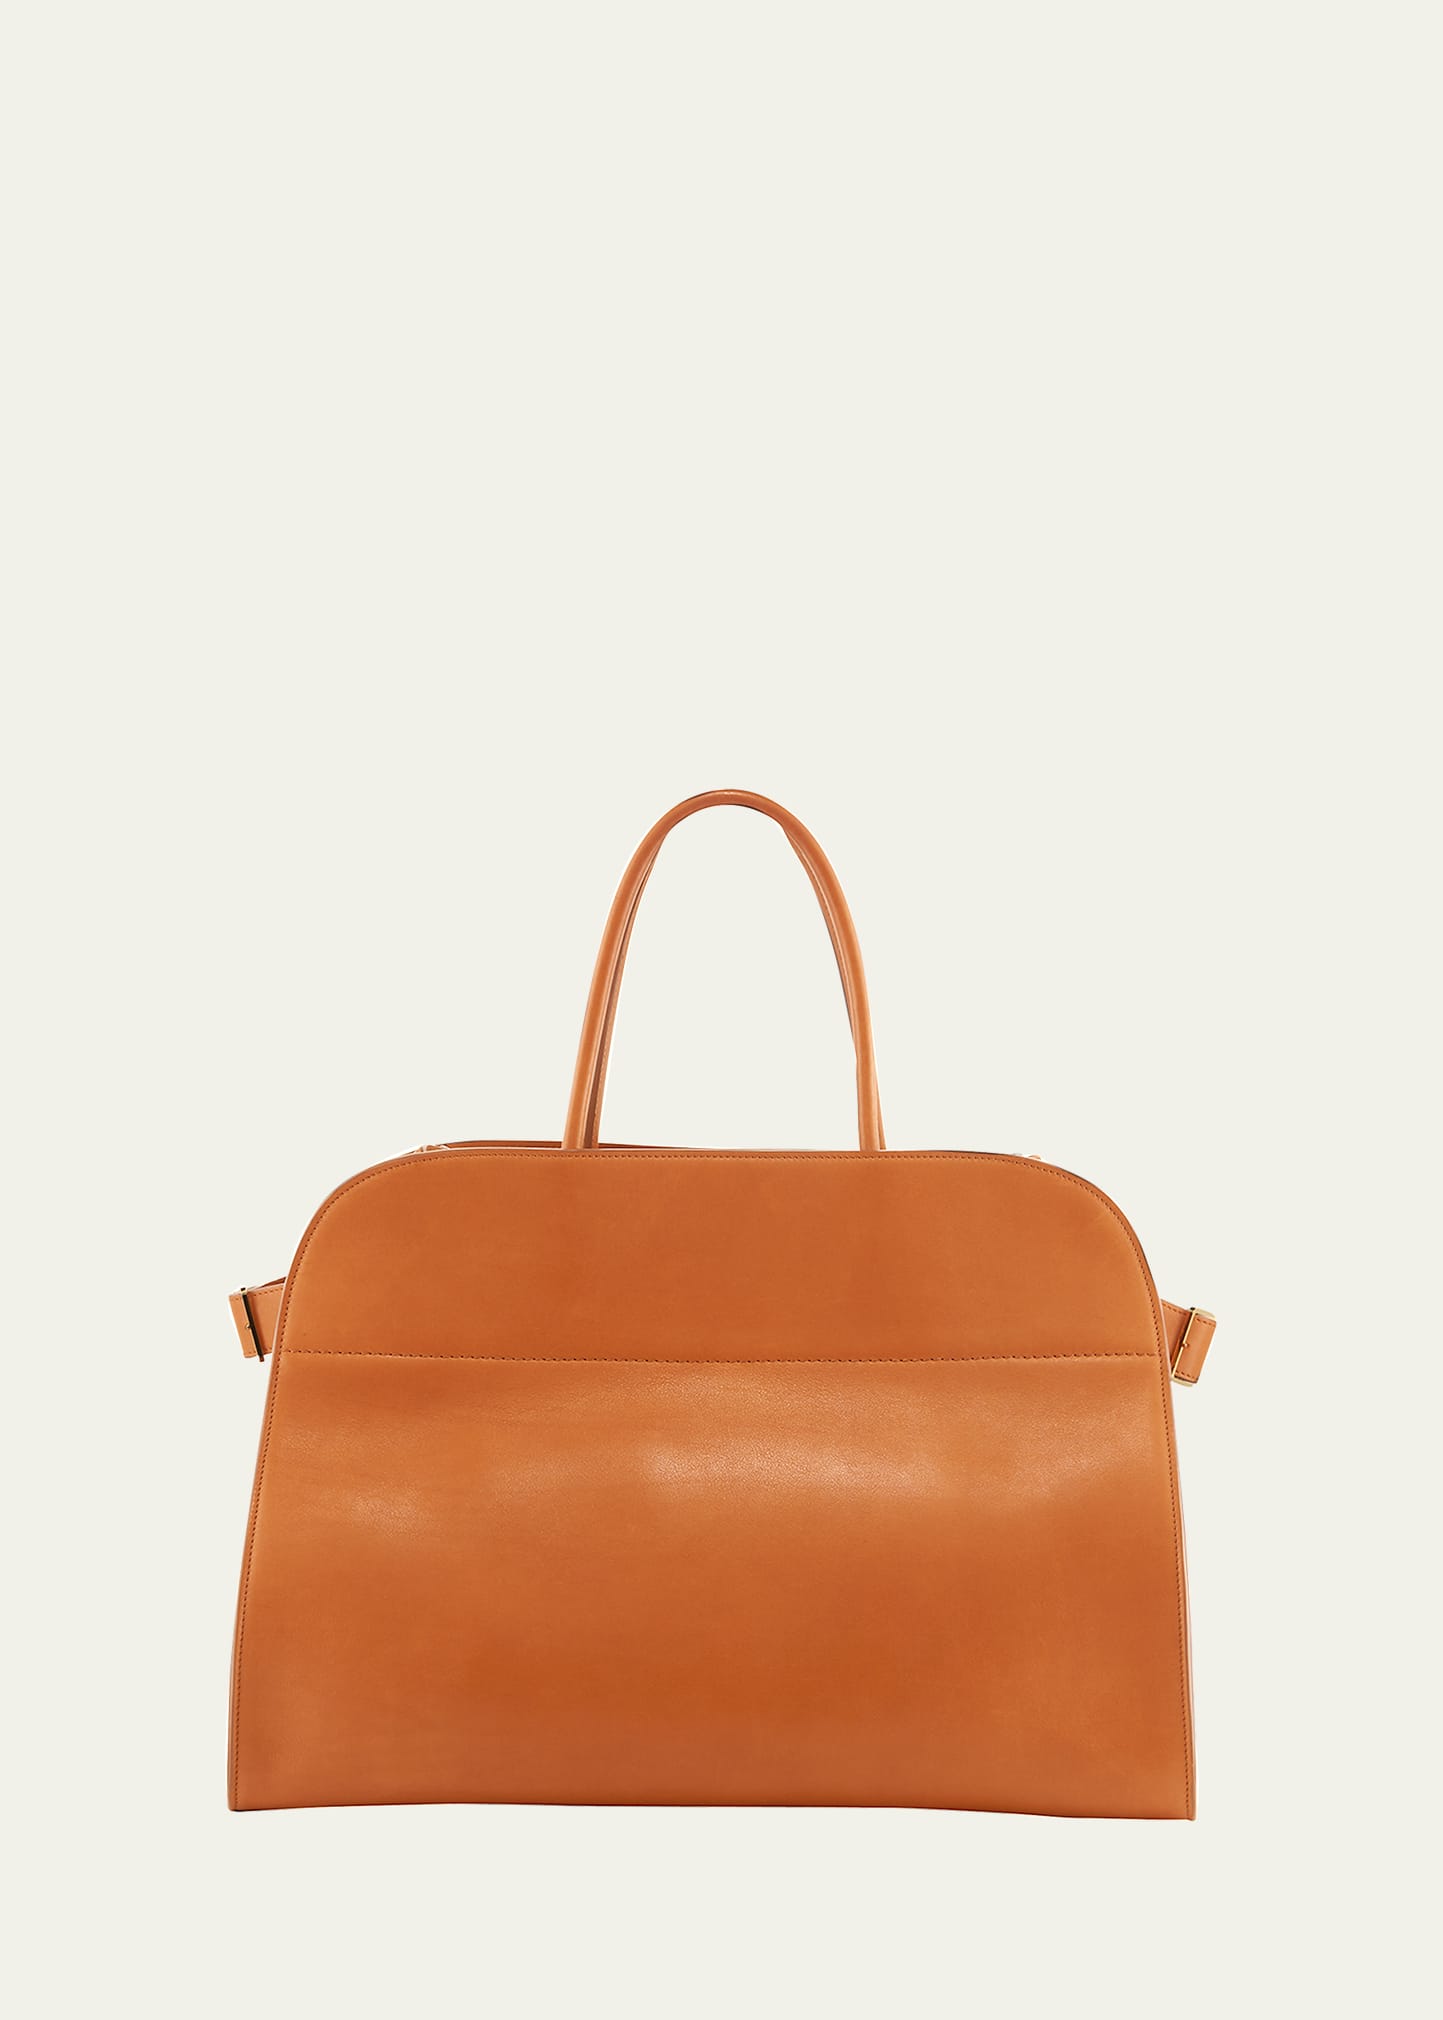 Margaux 17 Bag in Saddle Leather